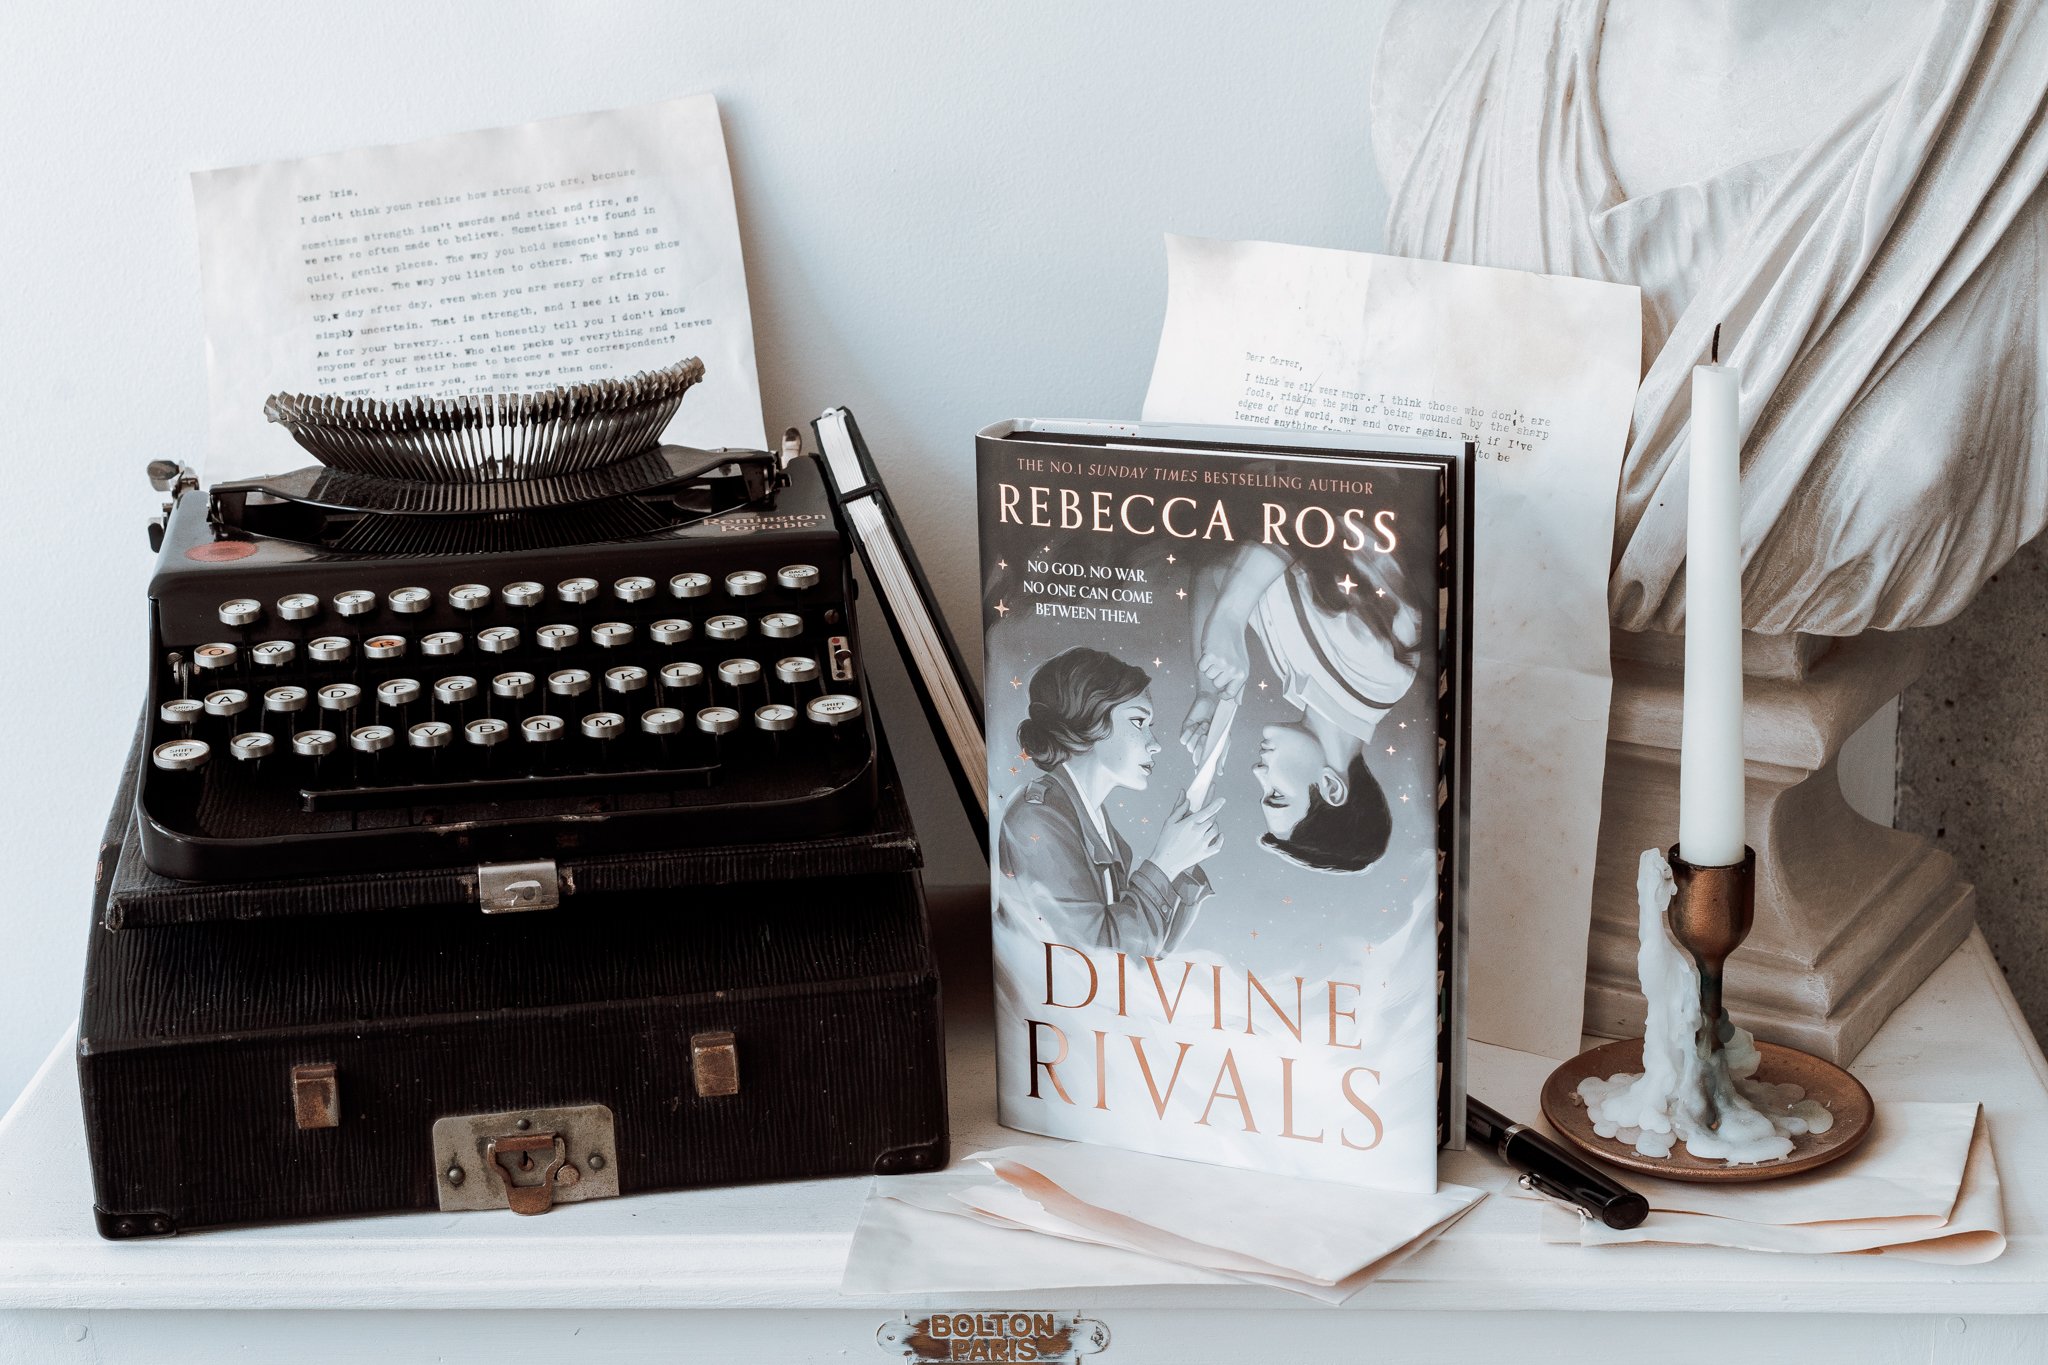 A copy of Divine Rivals stood next to a vintage typewriter on top of a white desk